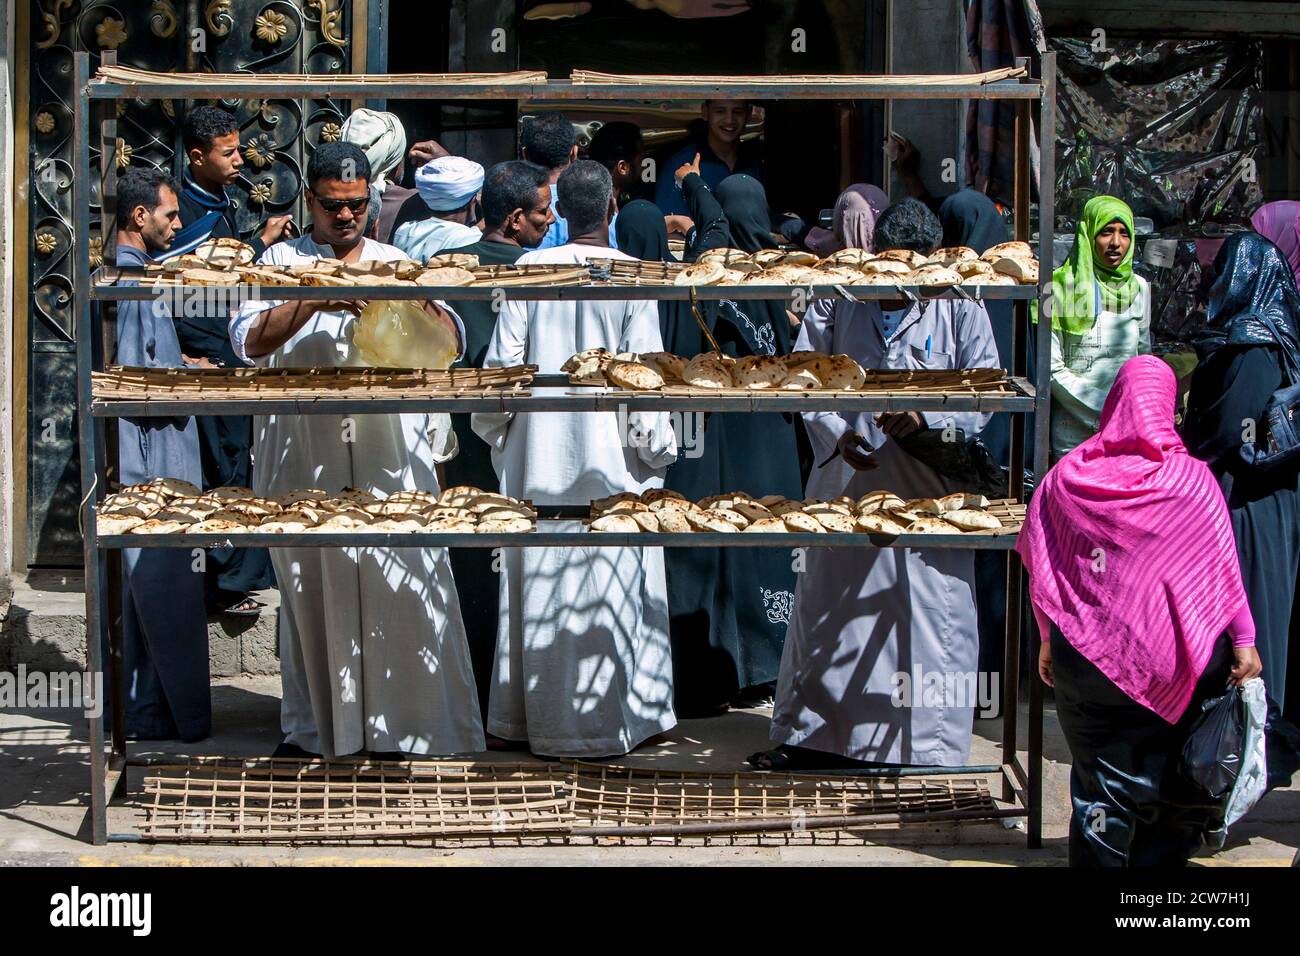 EDFU, EGYPT - MARCH 17, 2010 : Customers crowd around the entrance to a bakery in Edfu in Egypt. Bread forms the basis for all Egyptian meals. Stock Photo